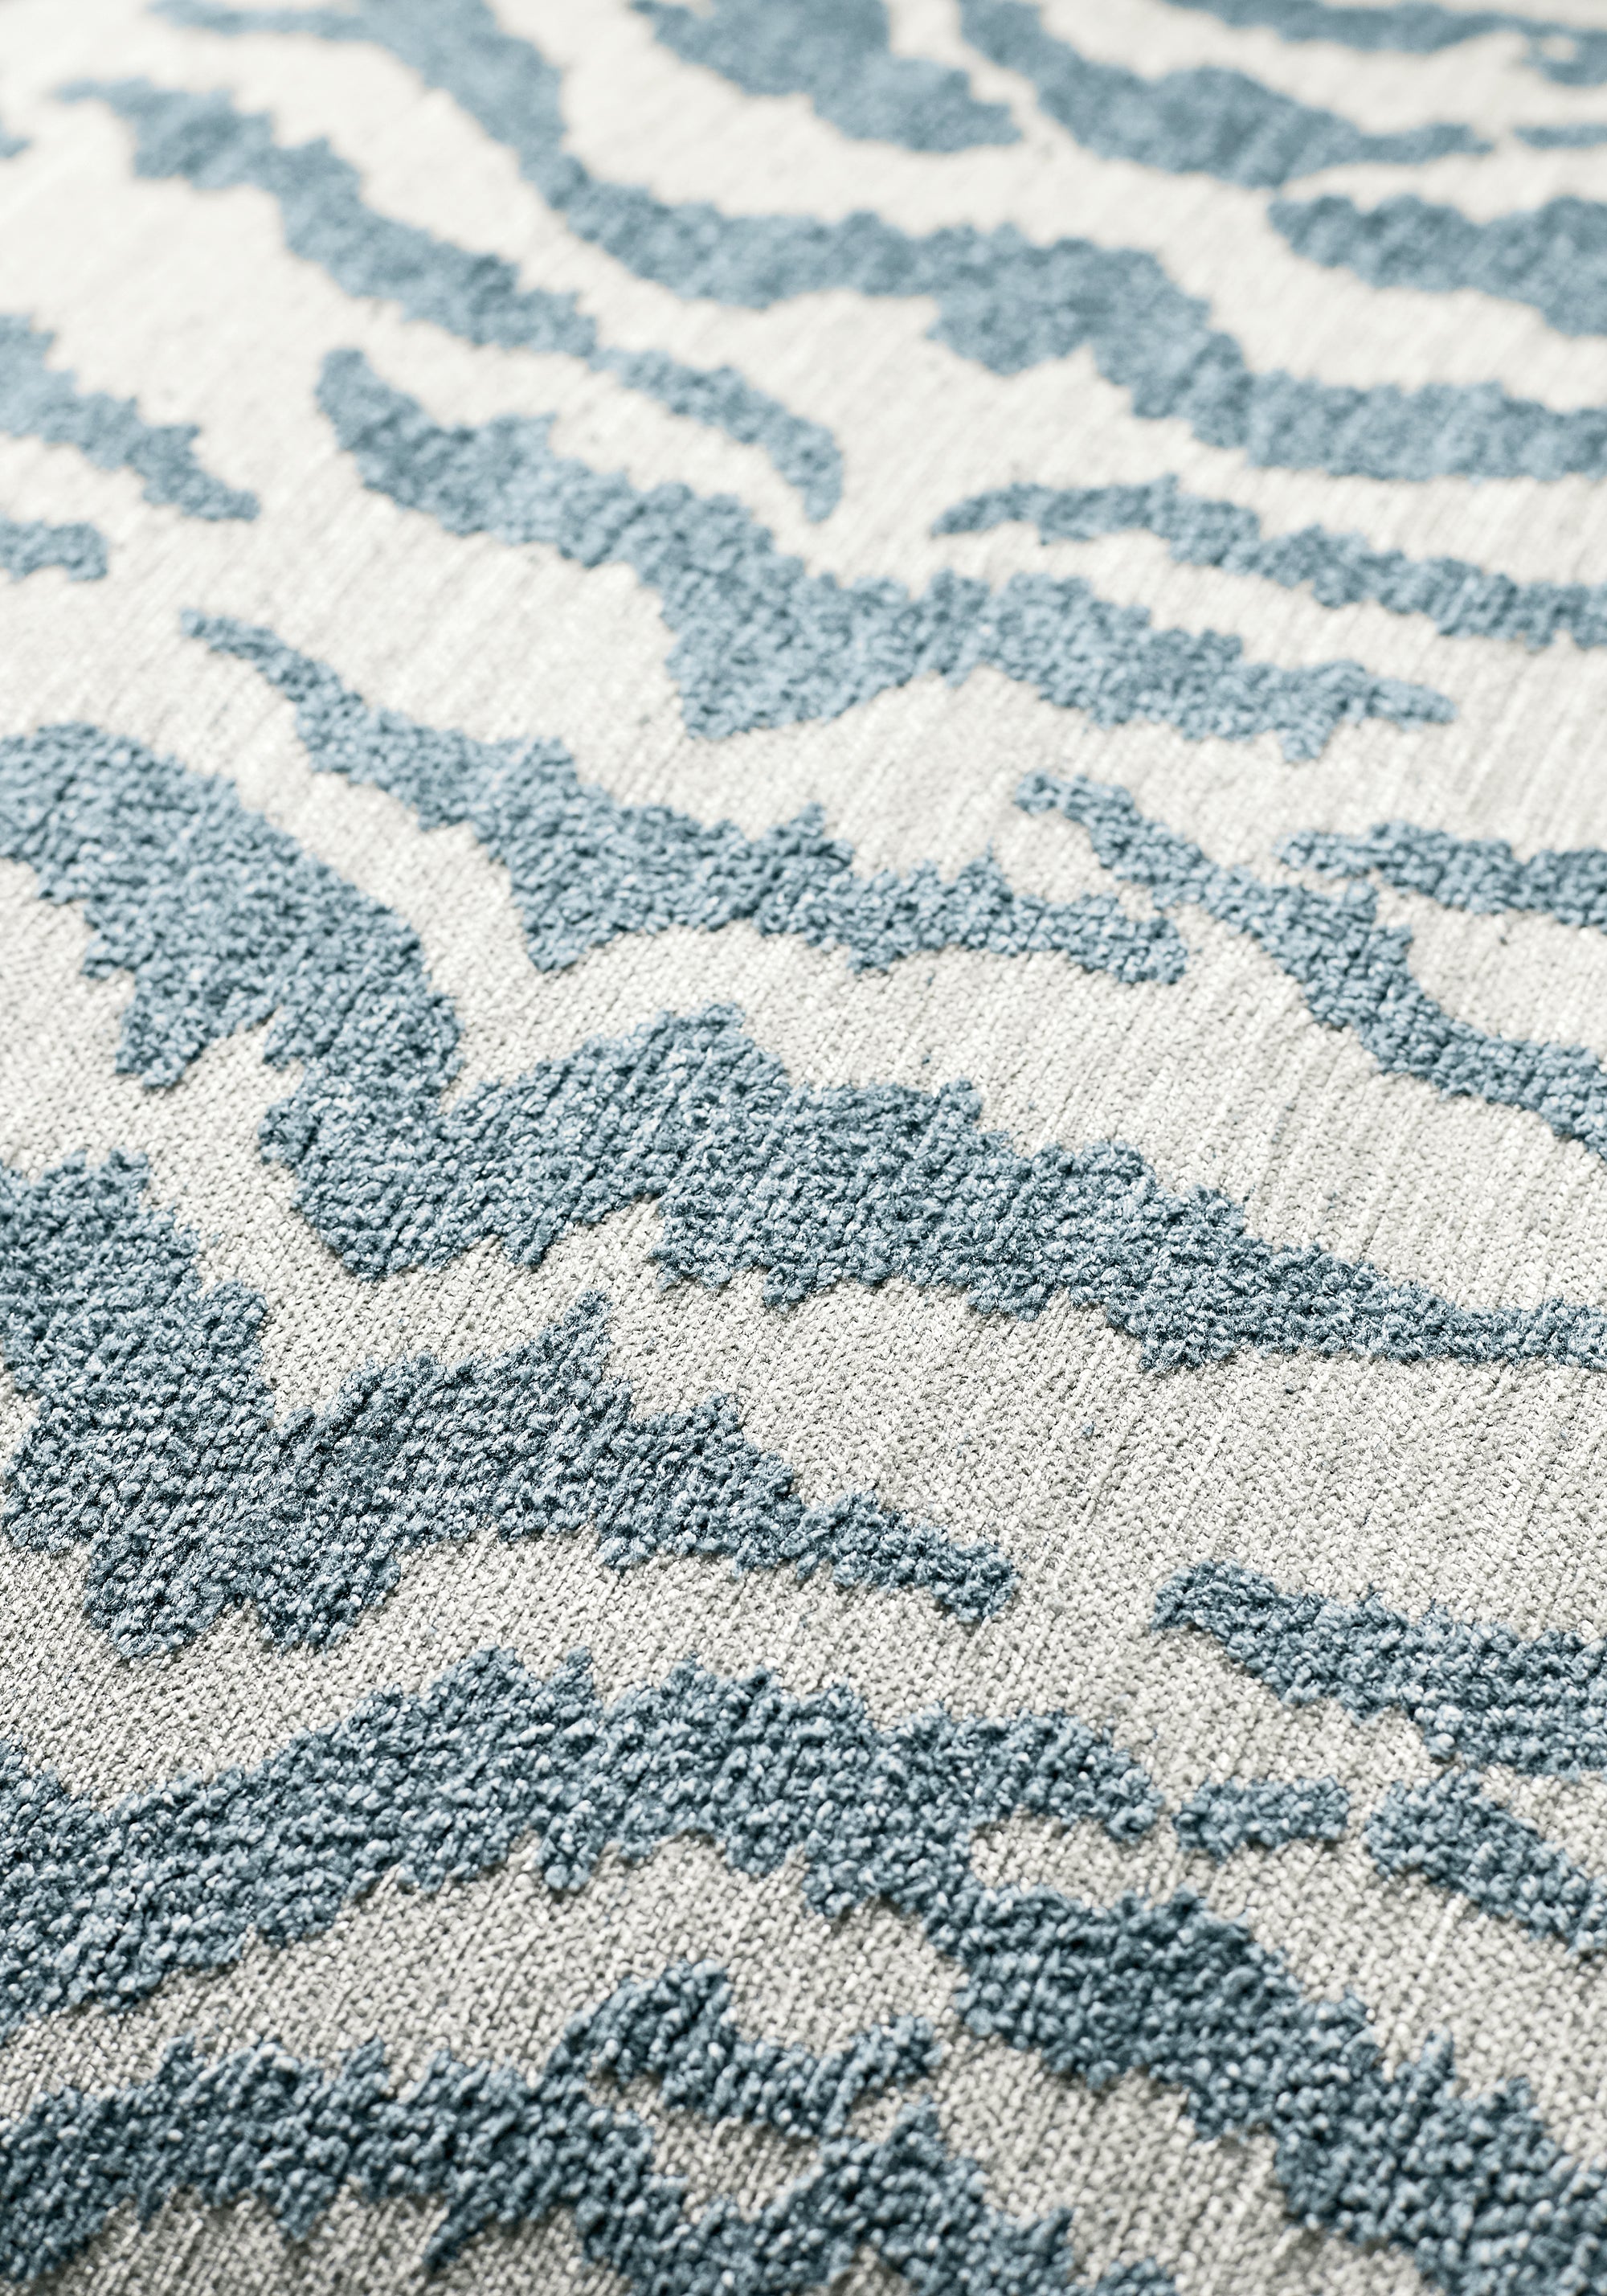 Detailed Aja woven fabric in mineral color - pattern number W80448 by Thibaut in the Woven Resource Vol 10 Menagerie collection